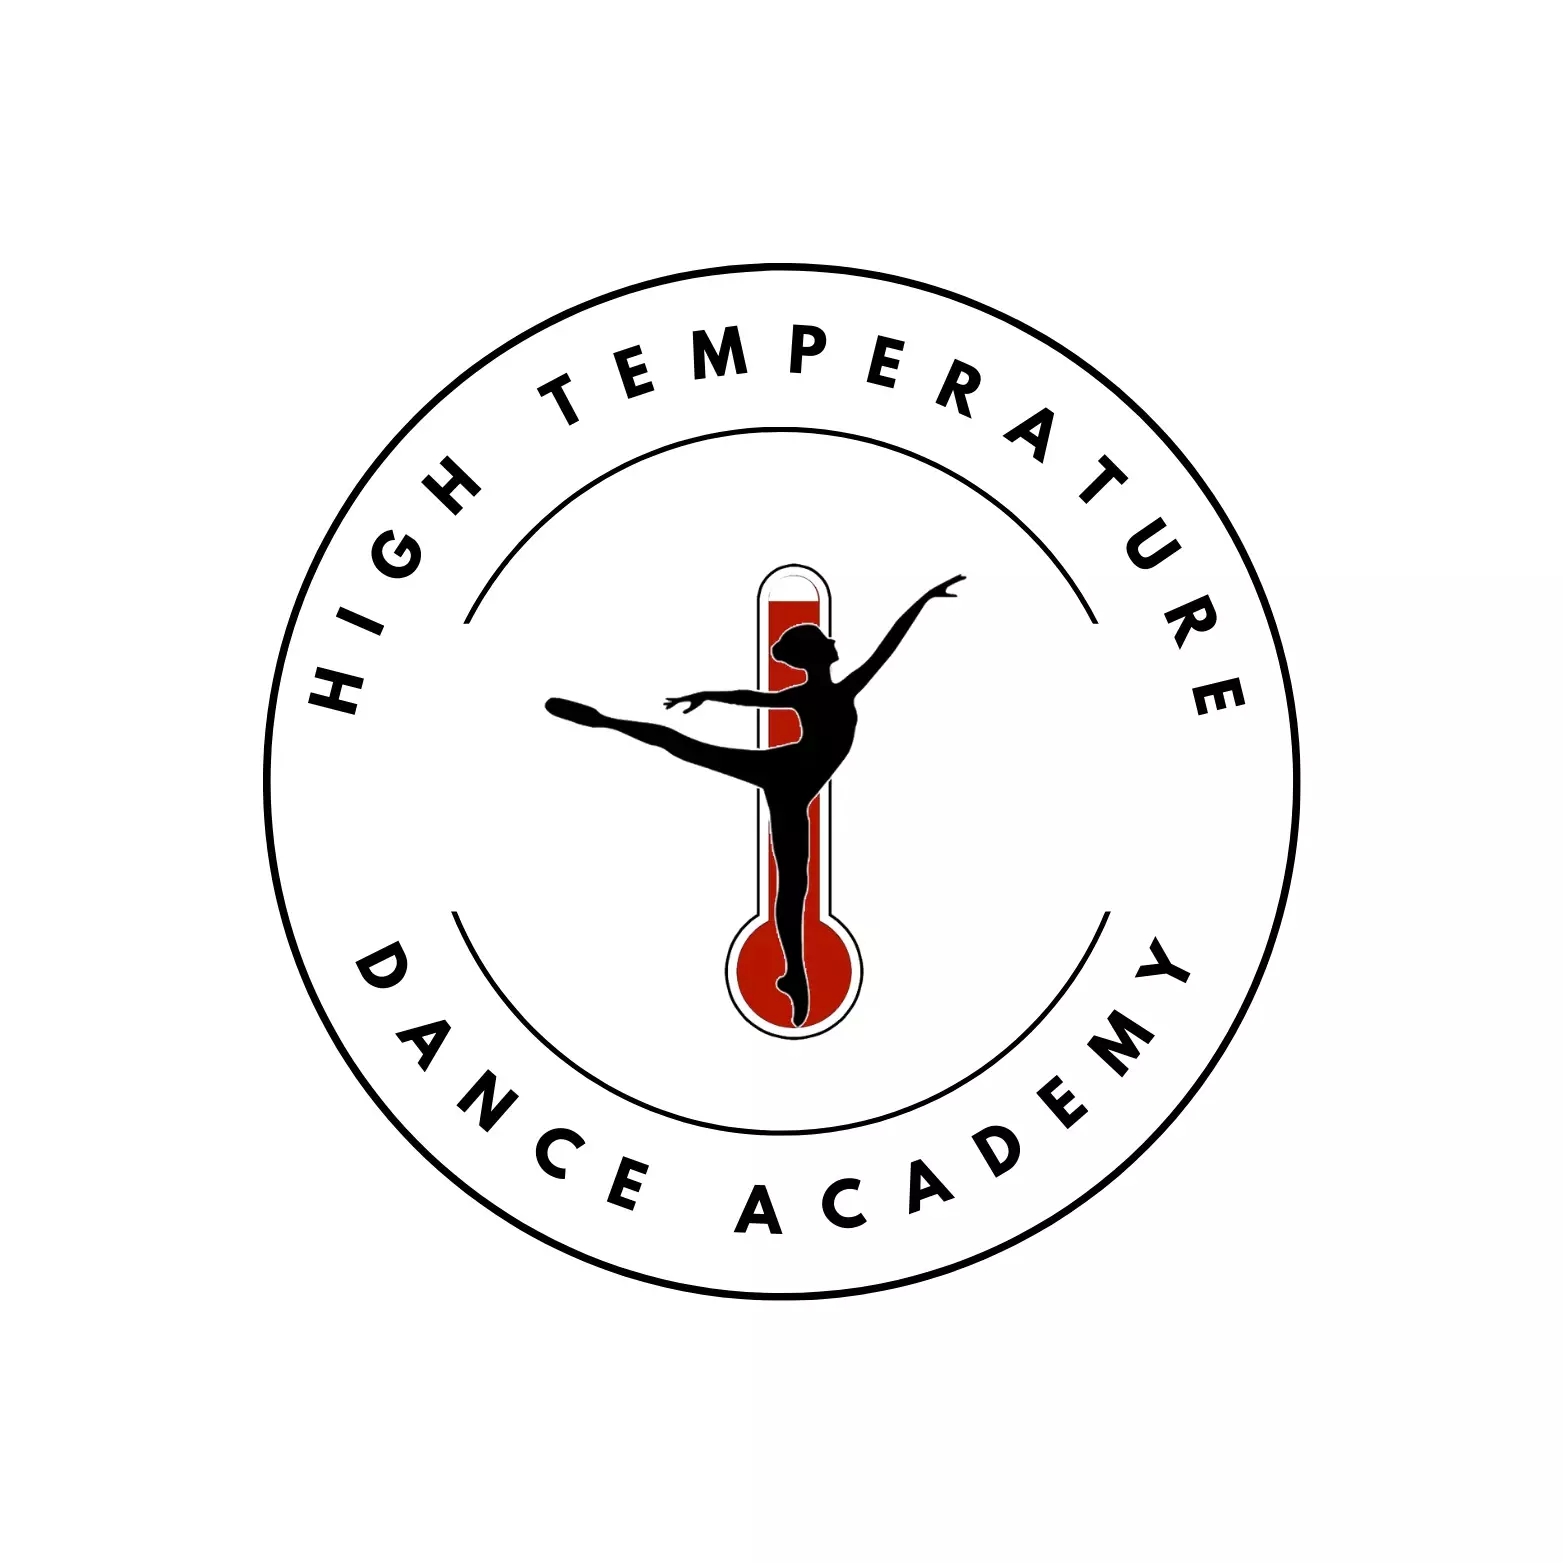 <h1 class="tribe-events-single-event-title">High Temperature Dance Academy Cookies and Canvas</h1>